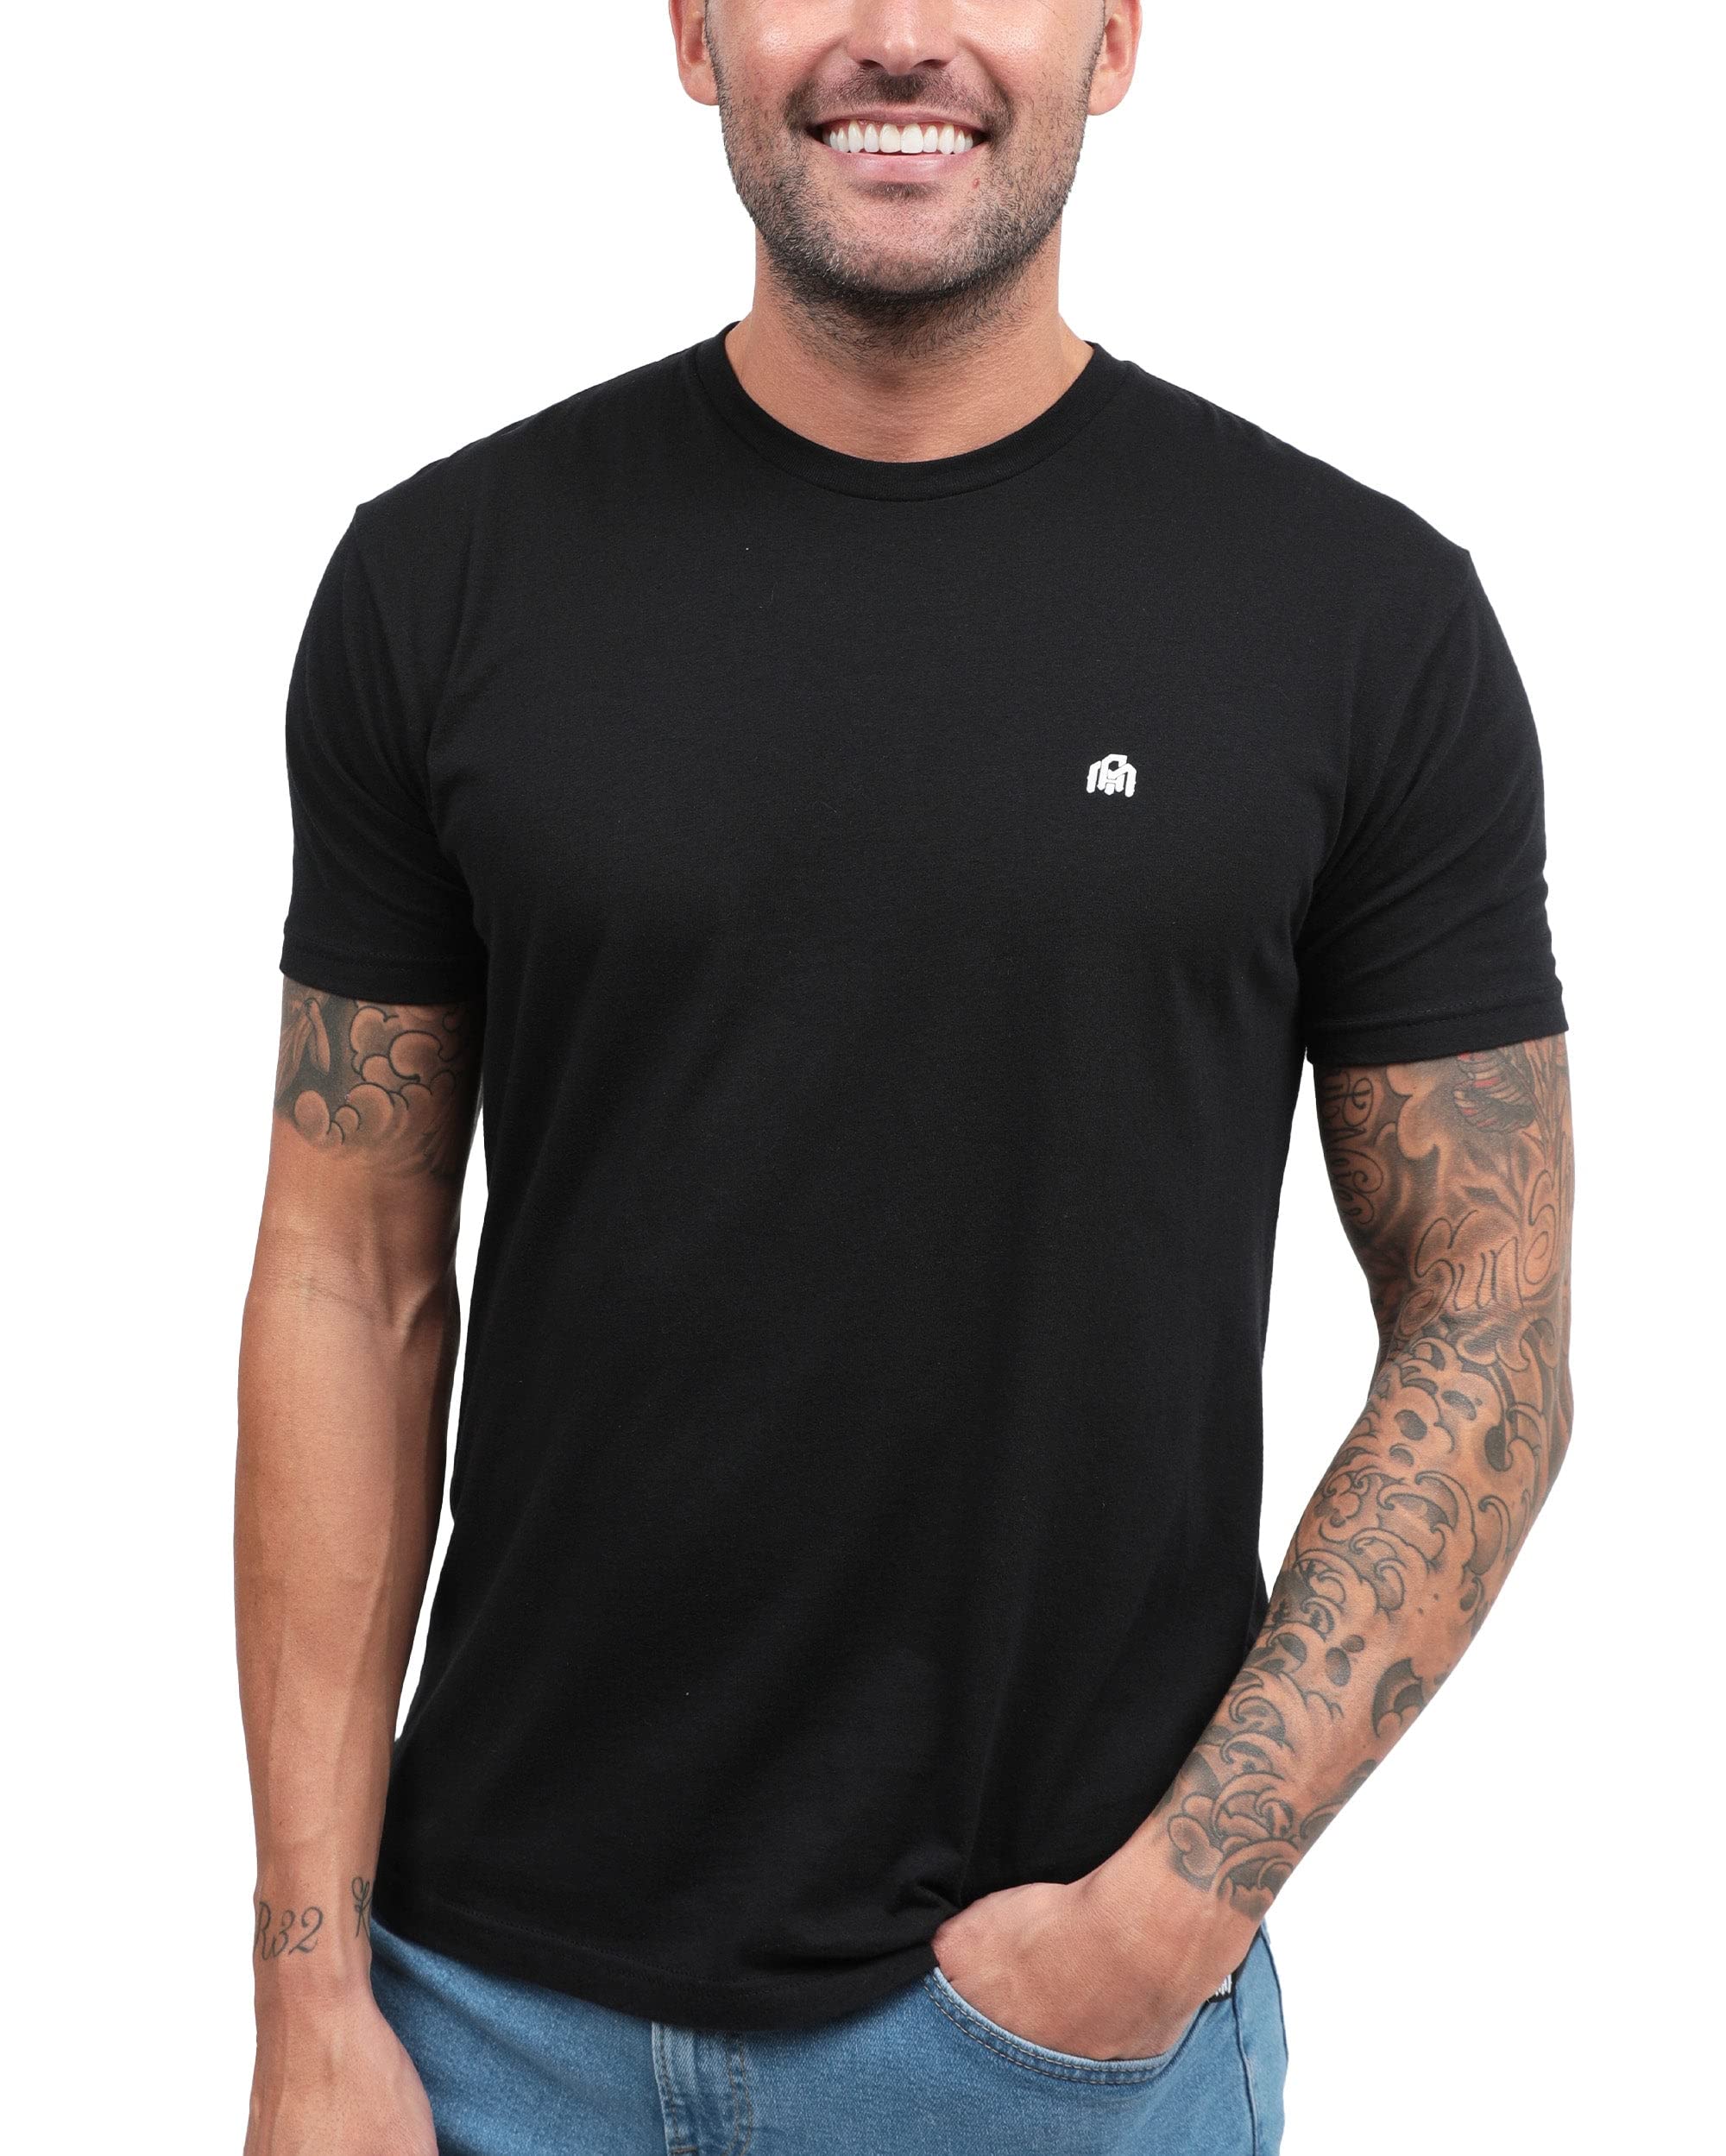 INTO THE AM Mens T Shirt - Short Sleeve Crew Neck Soft Fitted Tees S - 4XL Fresh Classic Tshirt